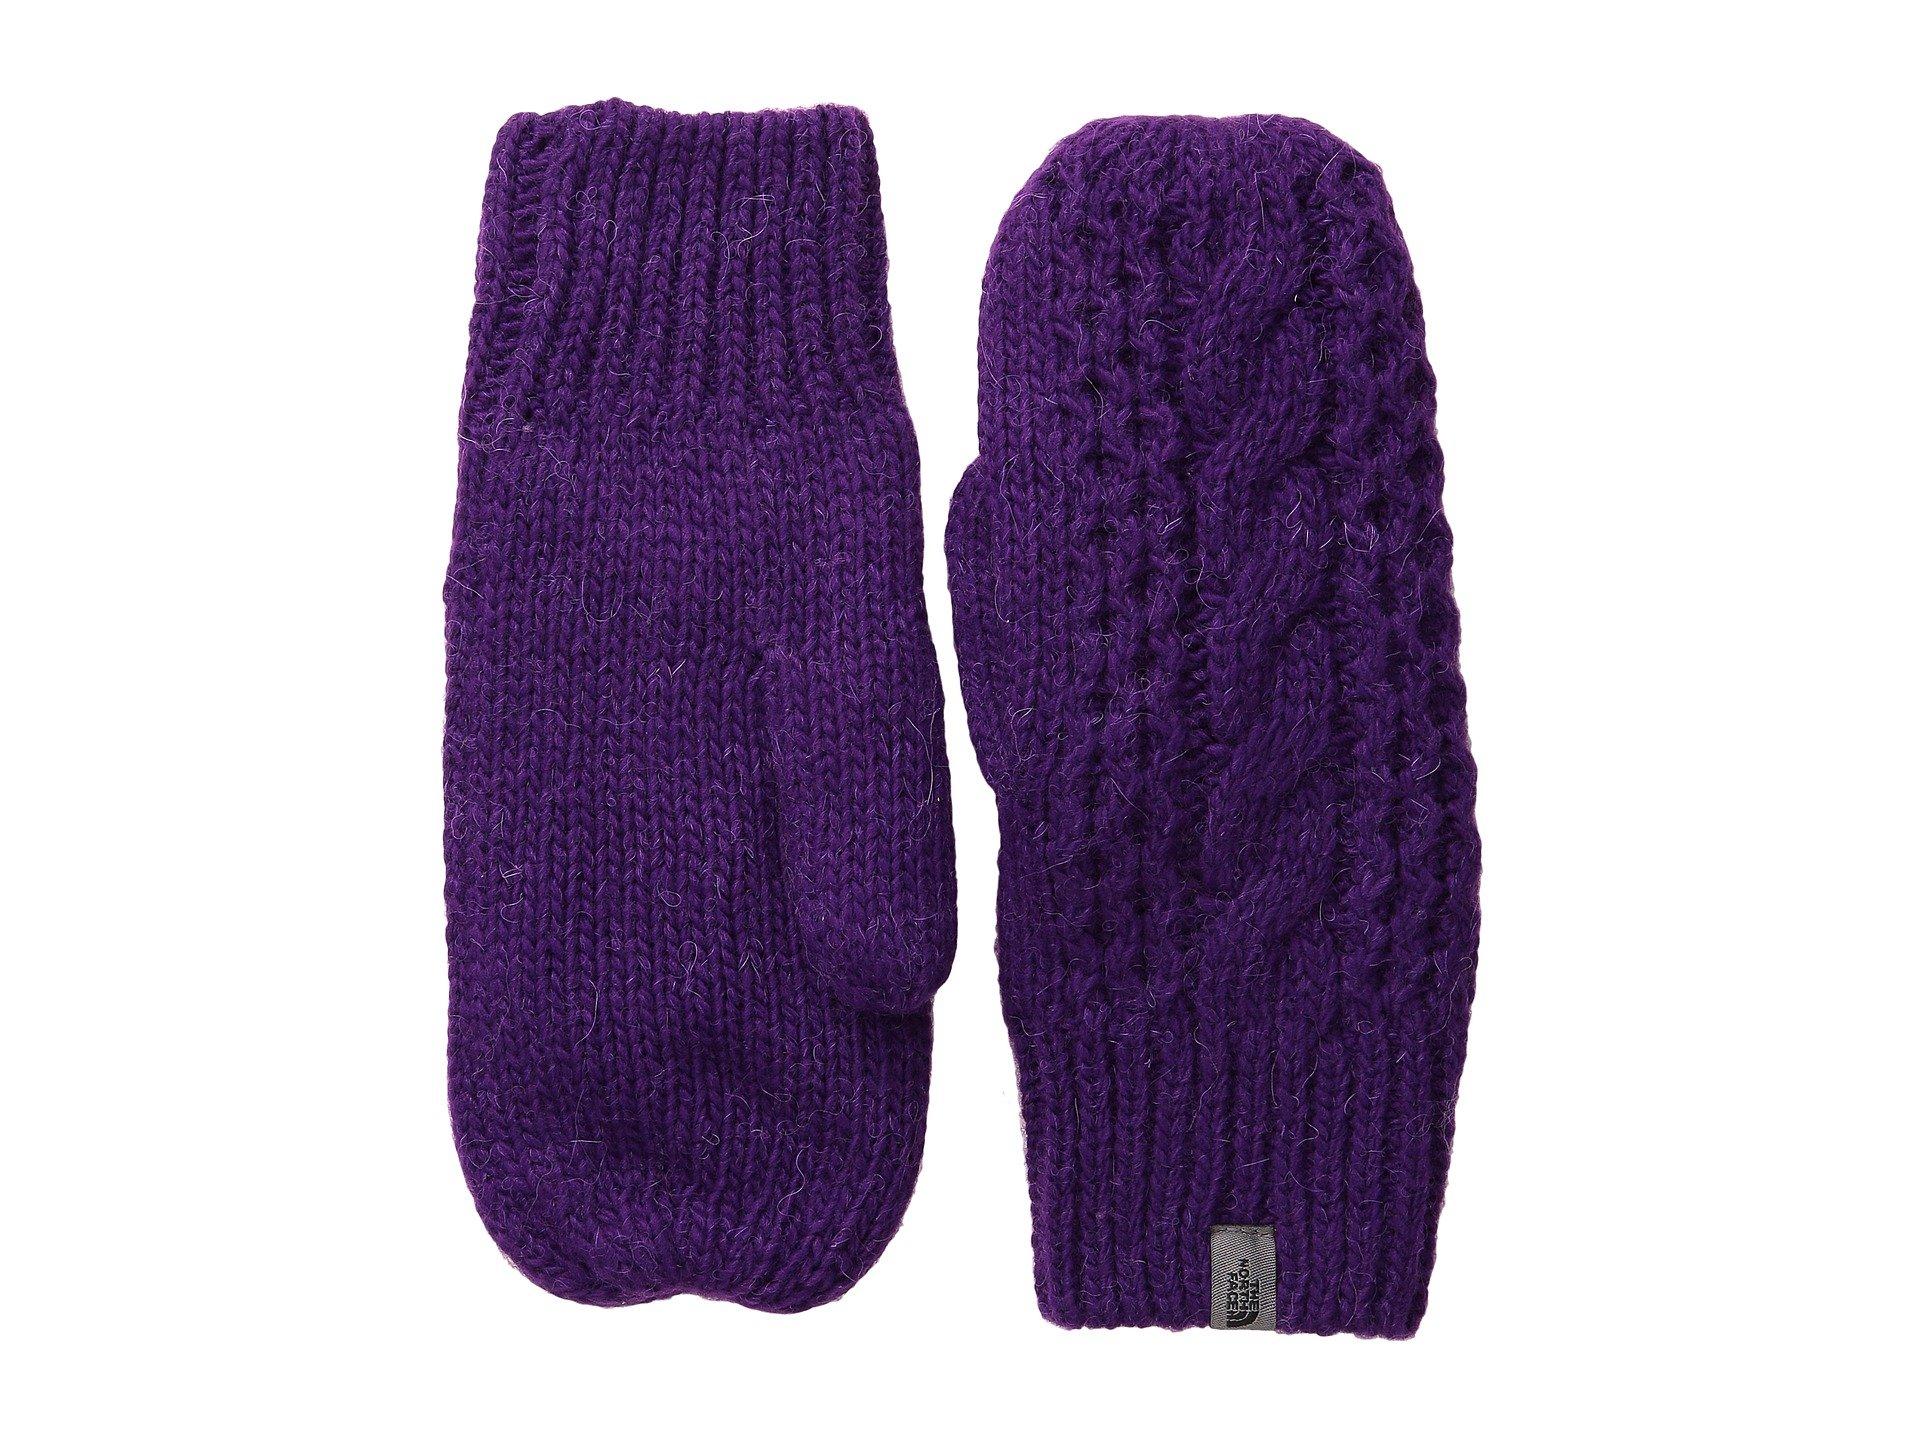 north face knit mittens